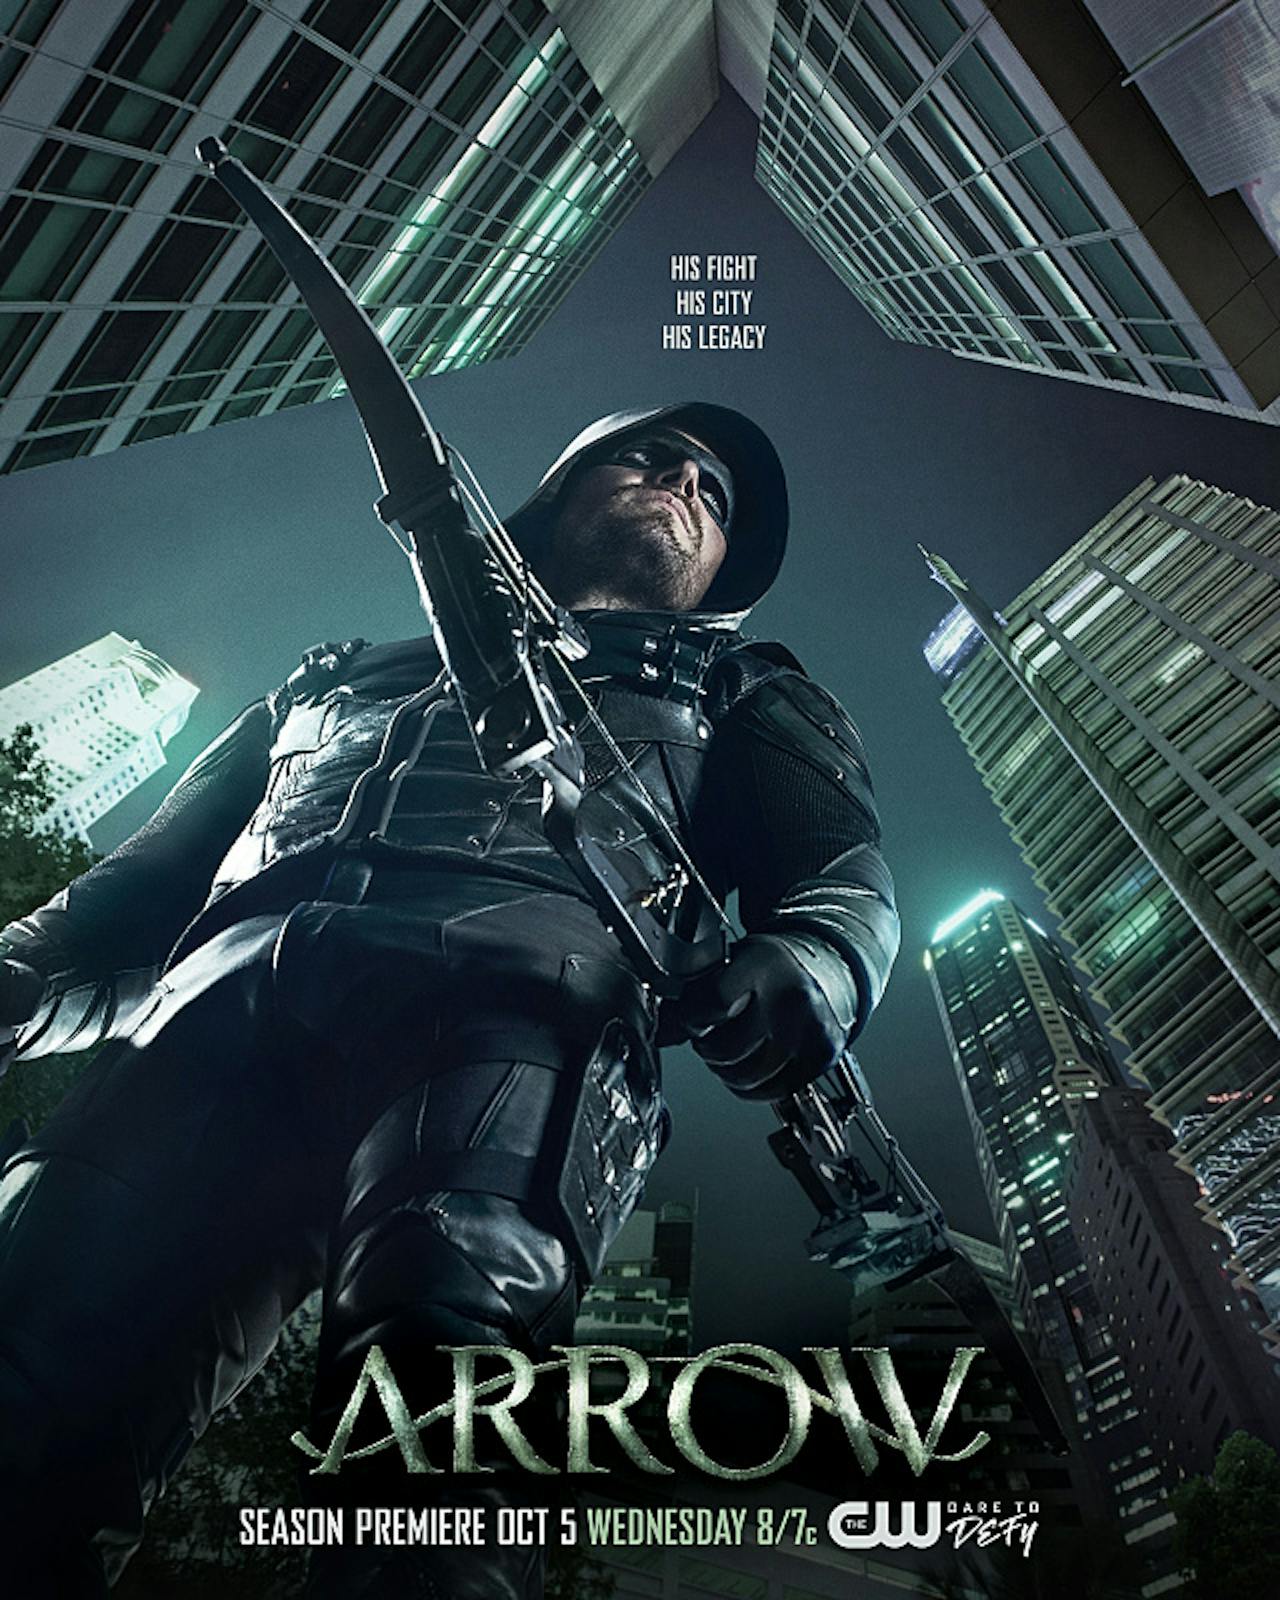 This 'Arrow' Poster Hints at Less Magic and More CrimeFighting in